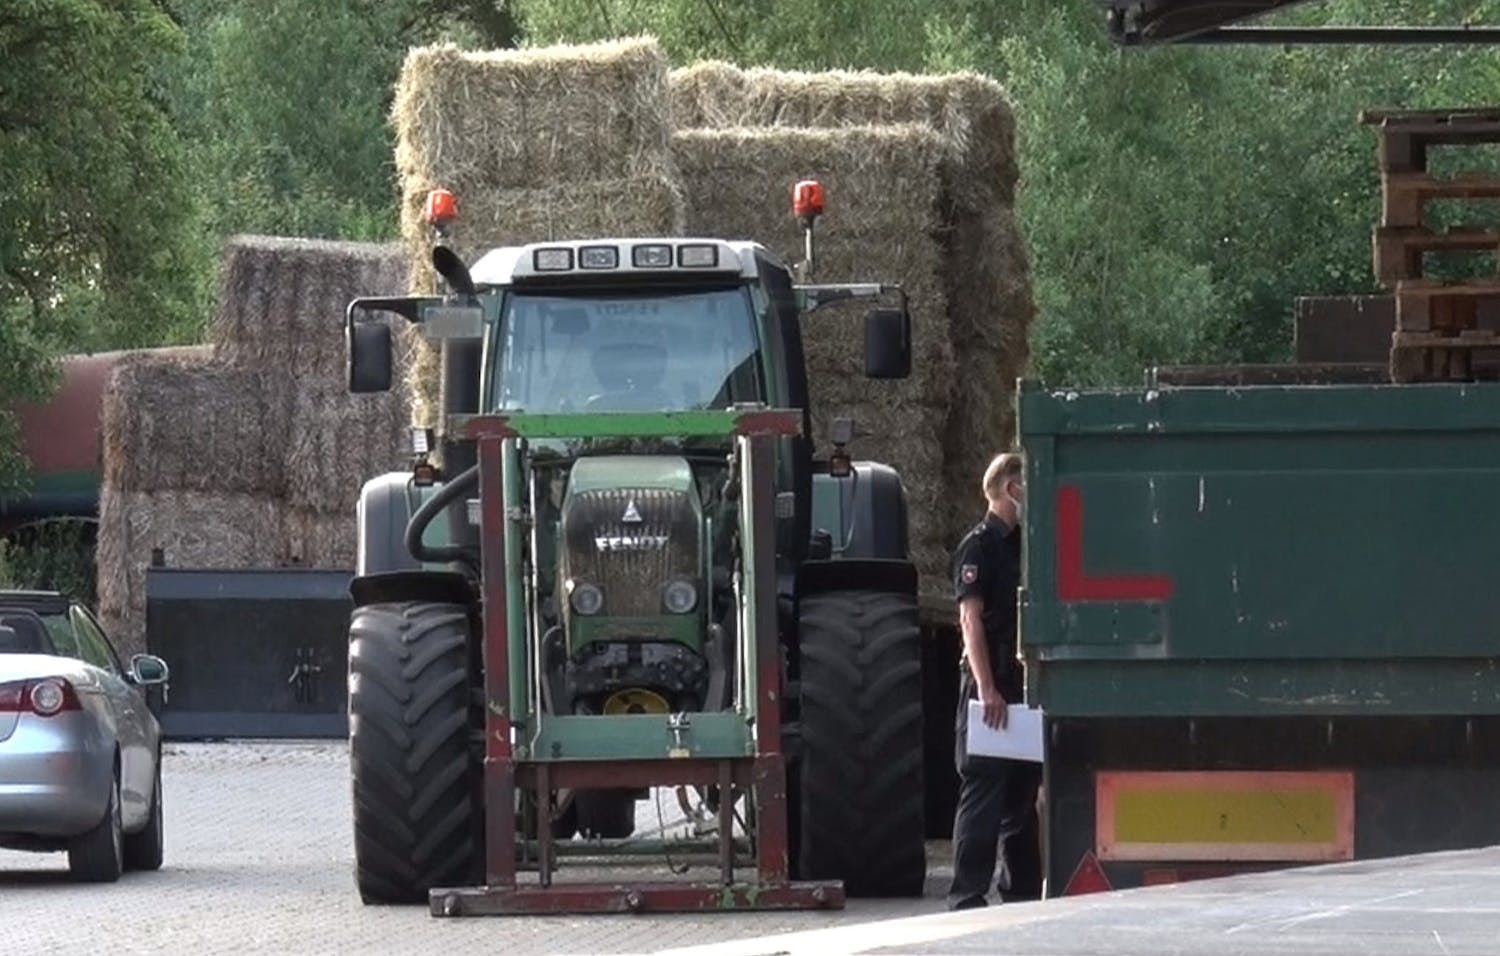 Farming: There's not a lot of hay being made